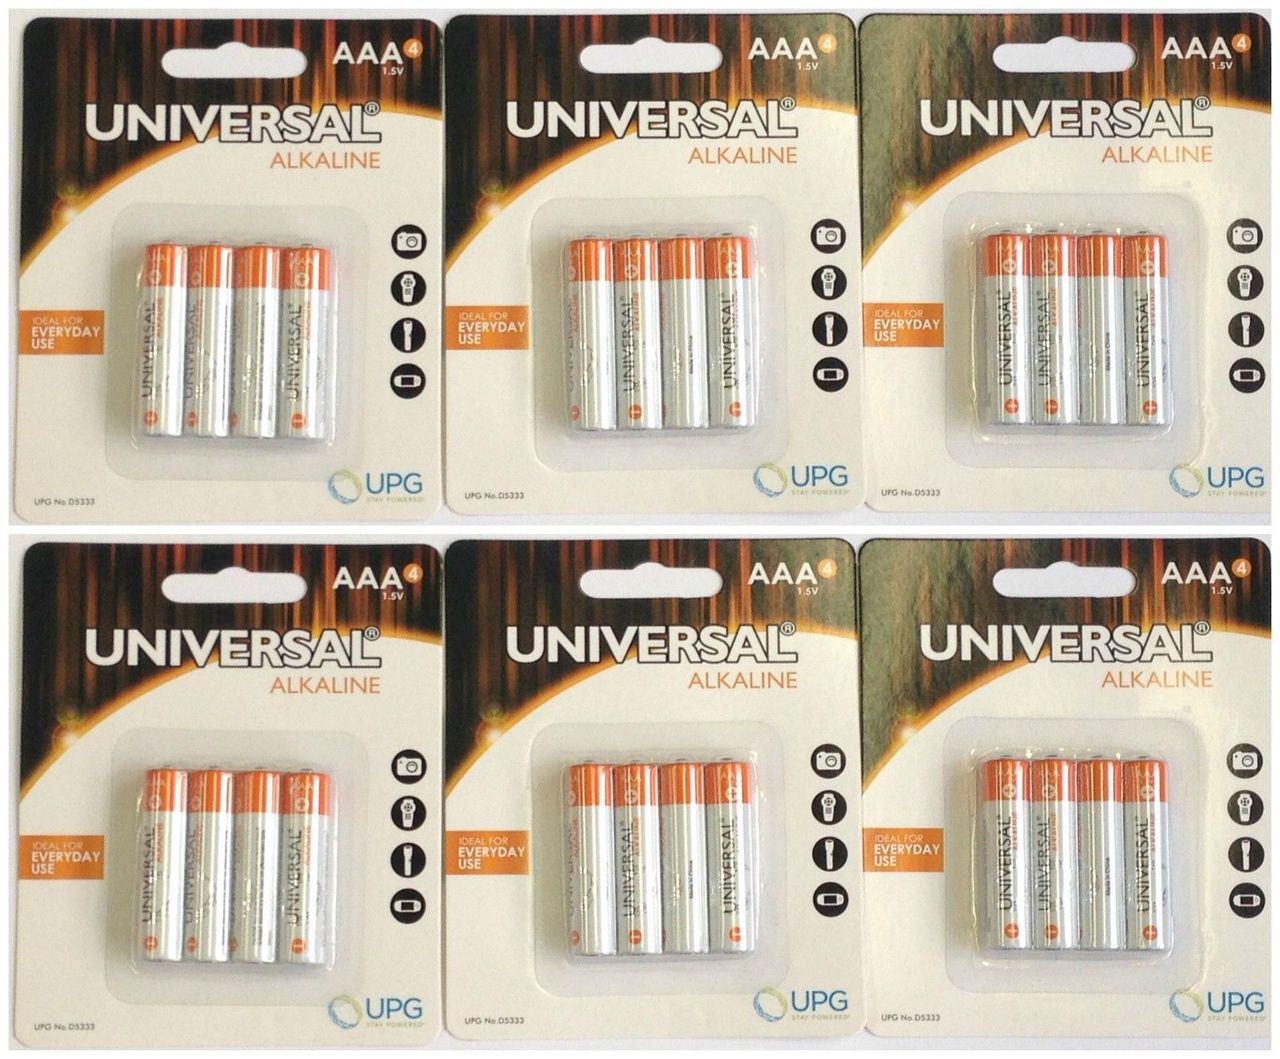 PACK OF 48 UNIVERSAL AAA - ALKALINE BATTERIES IN RETAIL PACKAGING + FREE SHIPPING